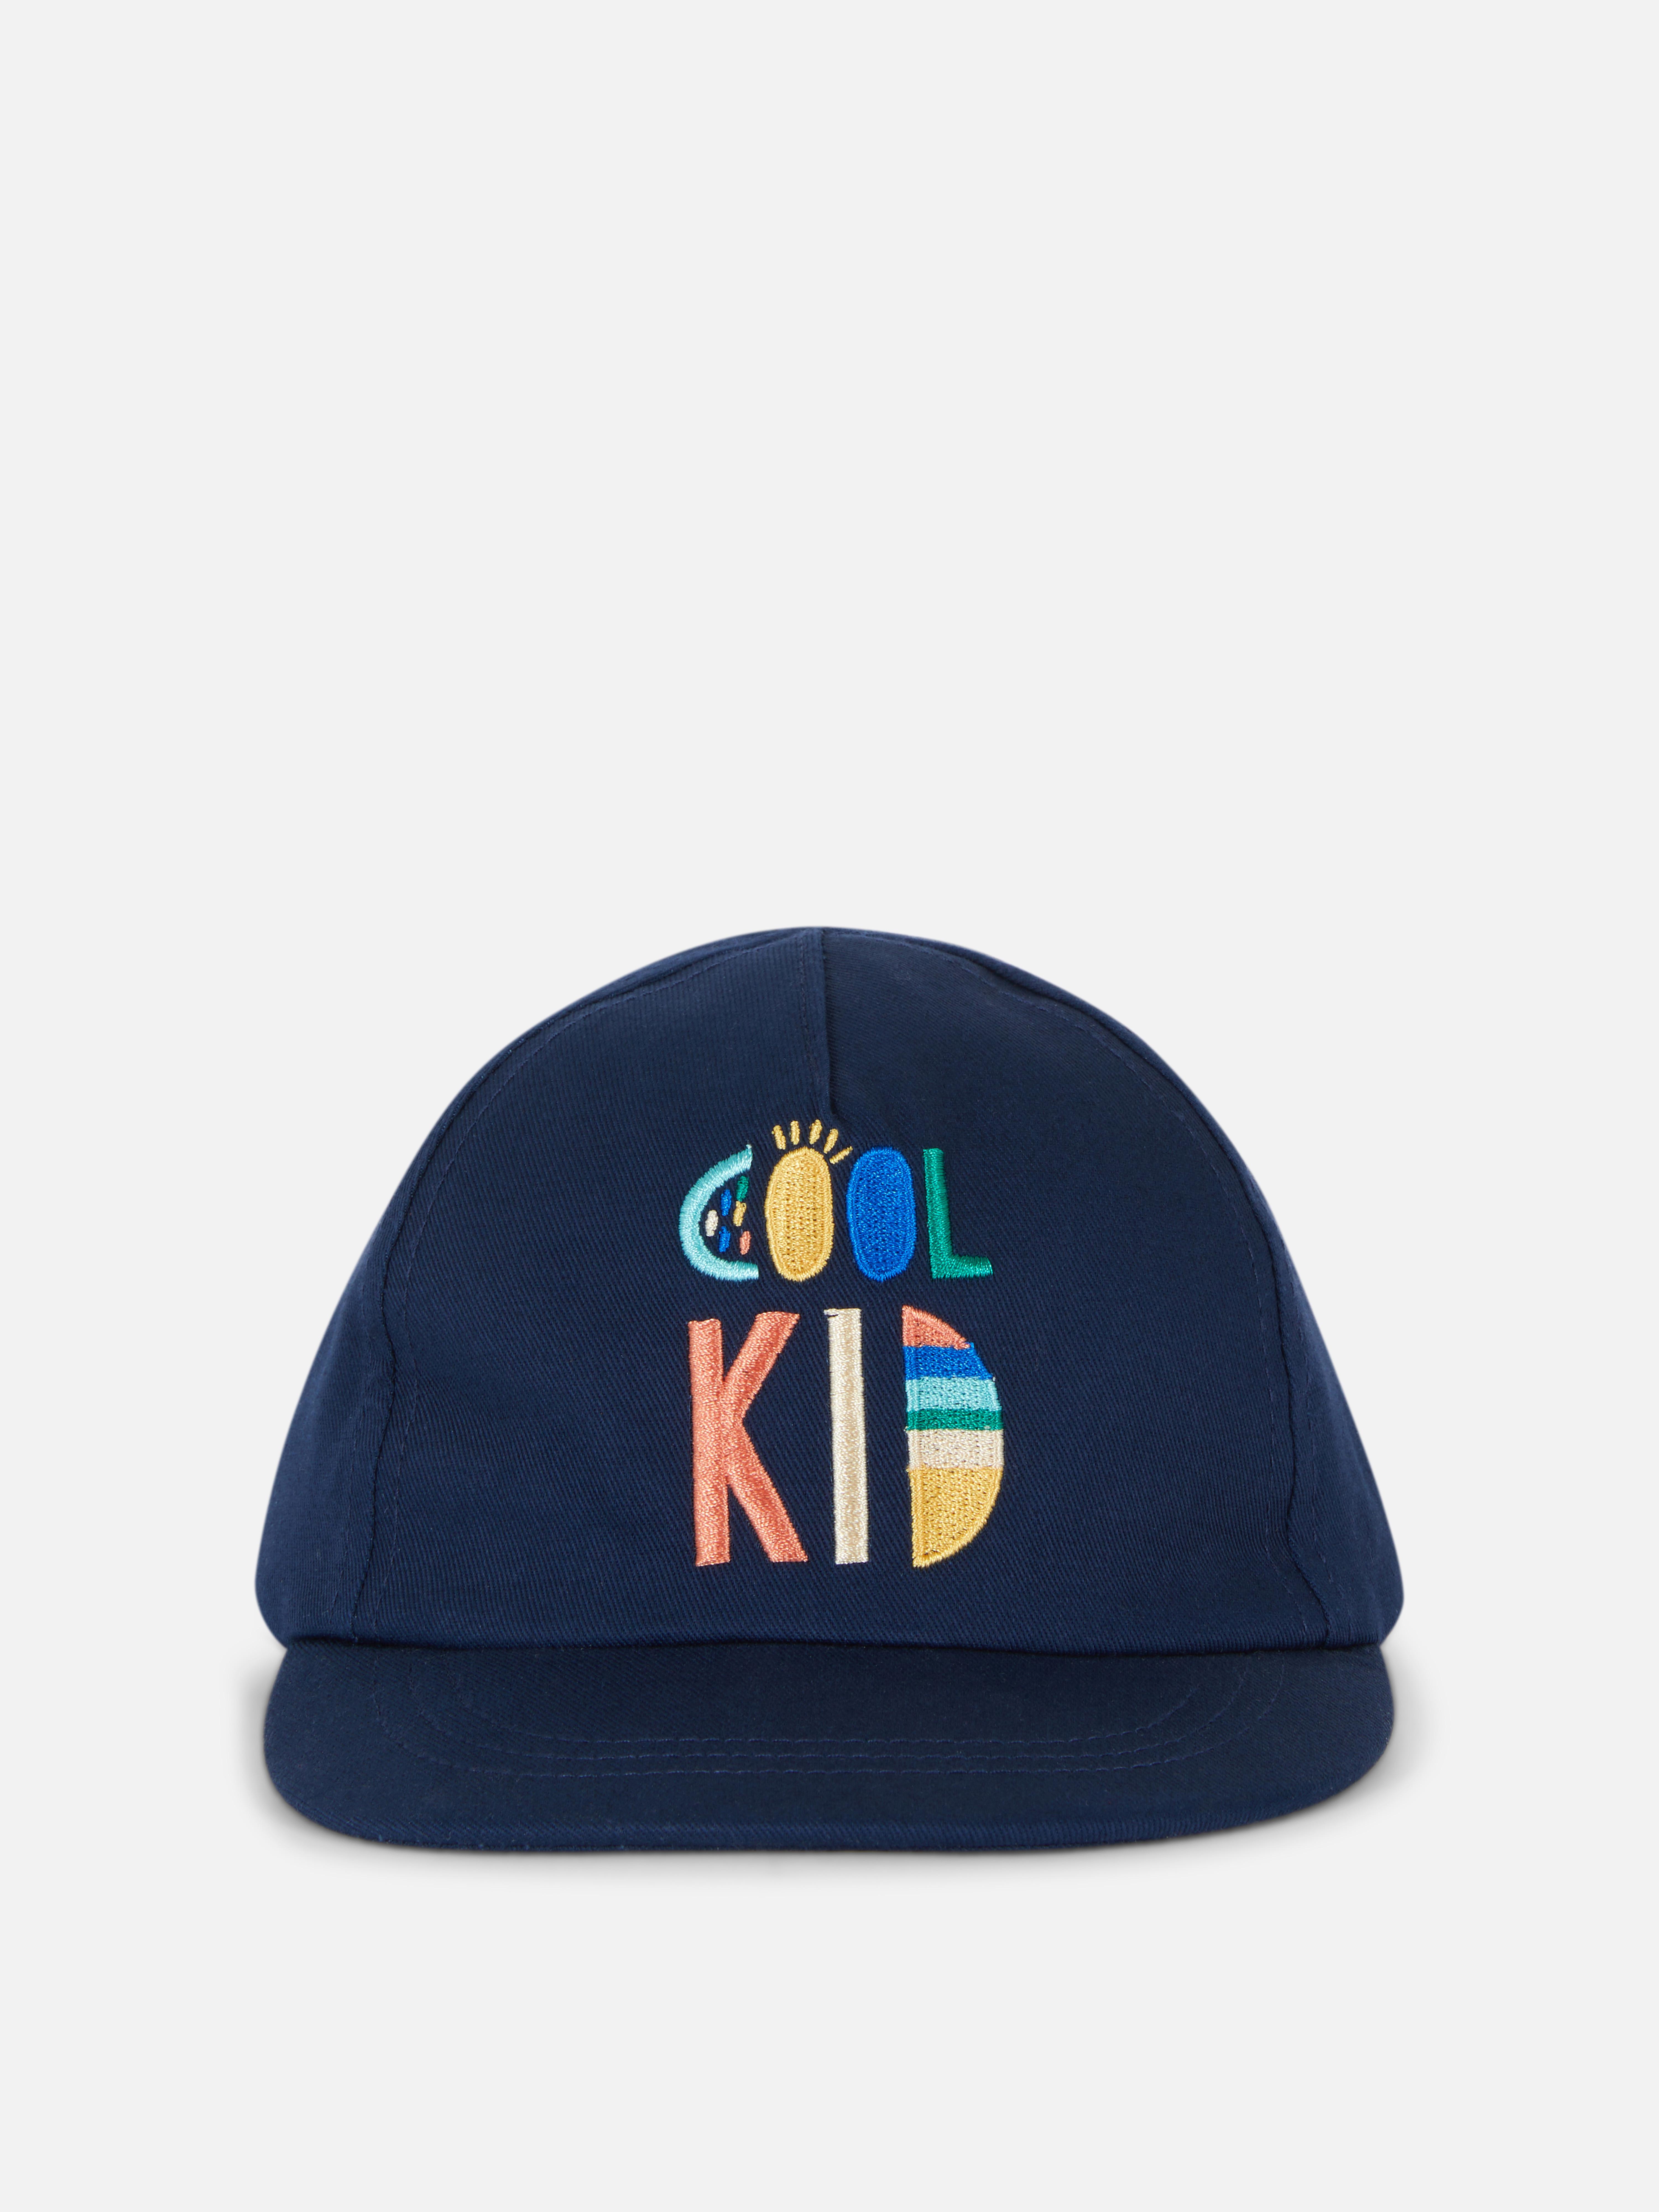 Cool Kid Embroidered Baseball Cap Navy